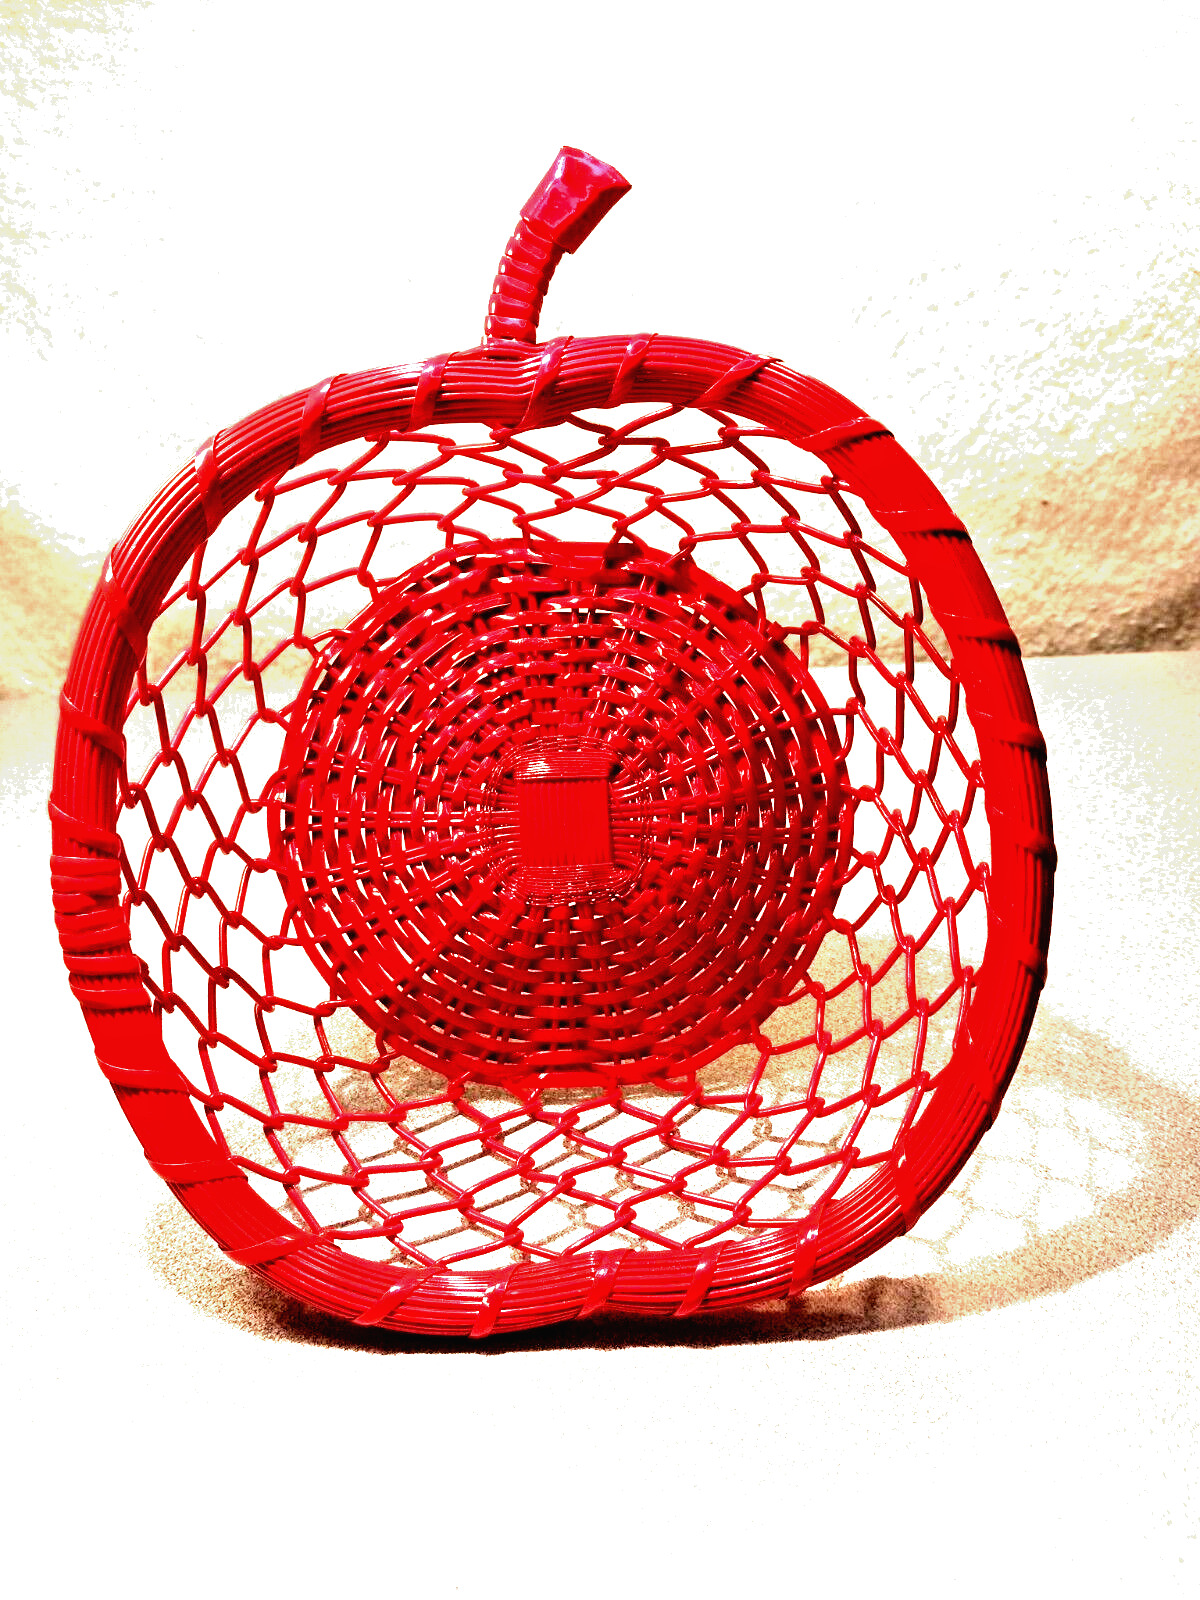 METAL WIER APPLE BASKET BRIGHT RED THICK STURDY BEAUTIFULY MADE LARGE